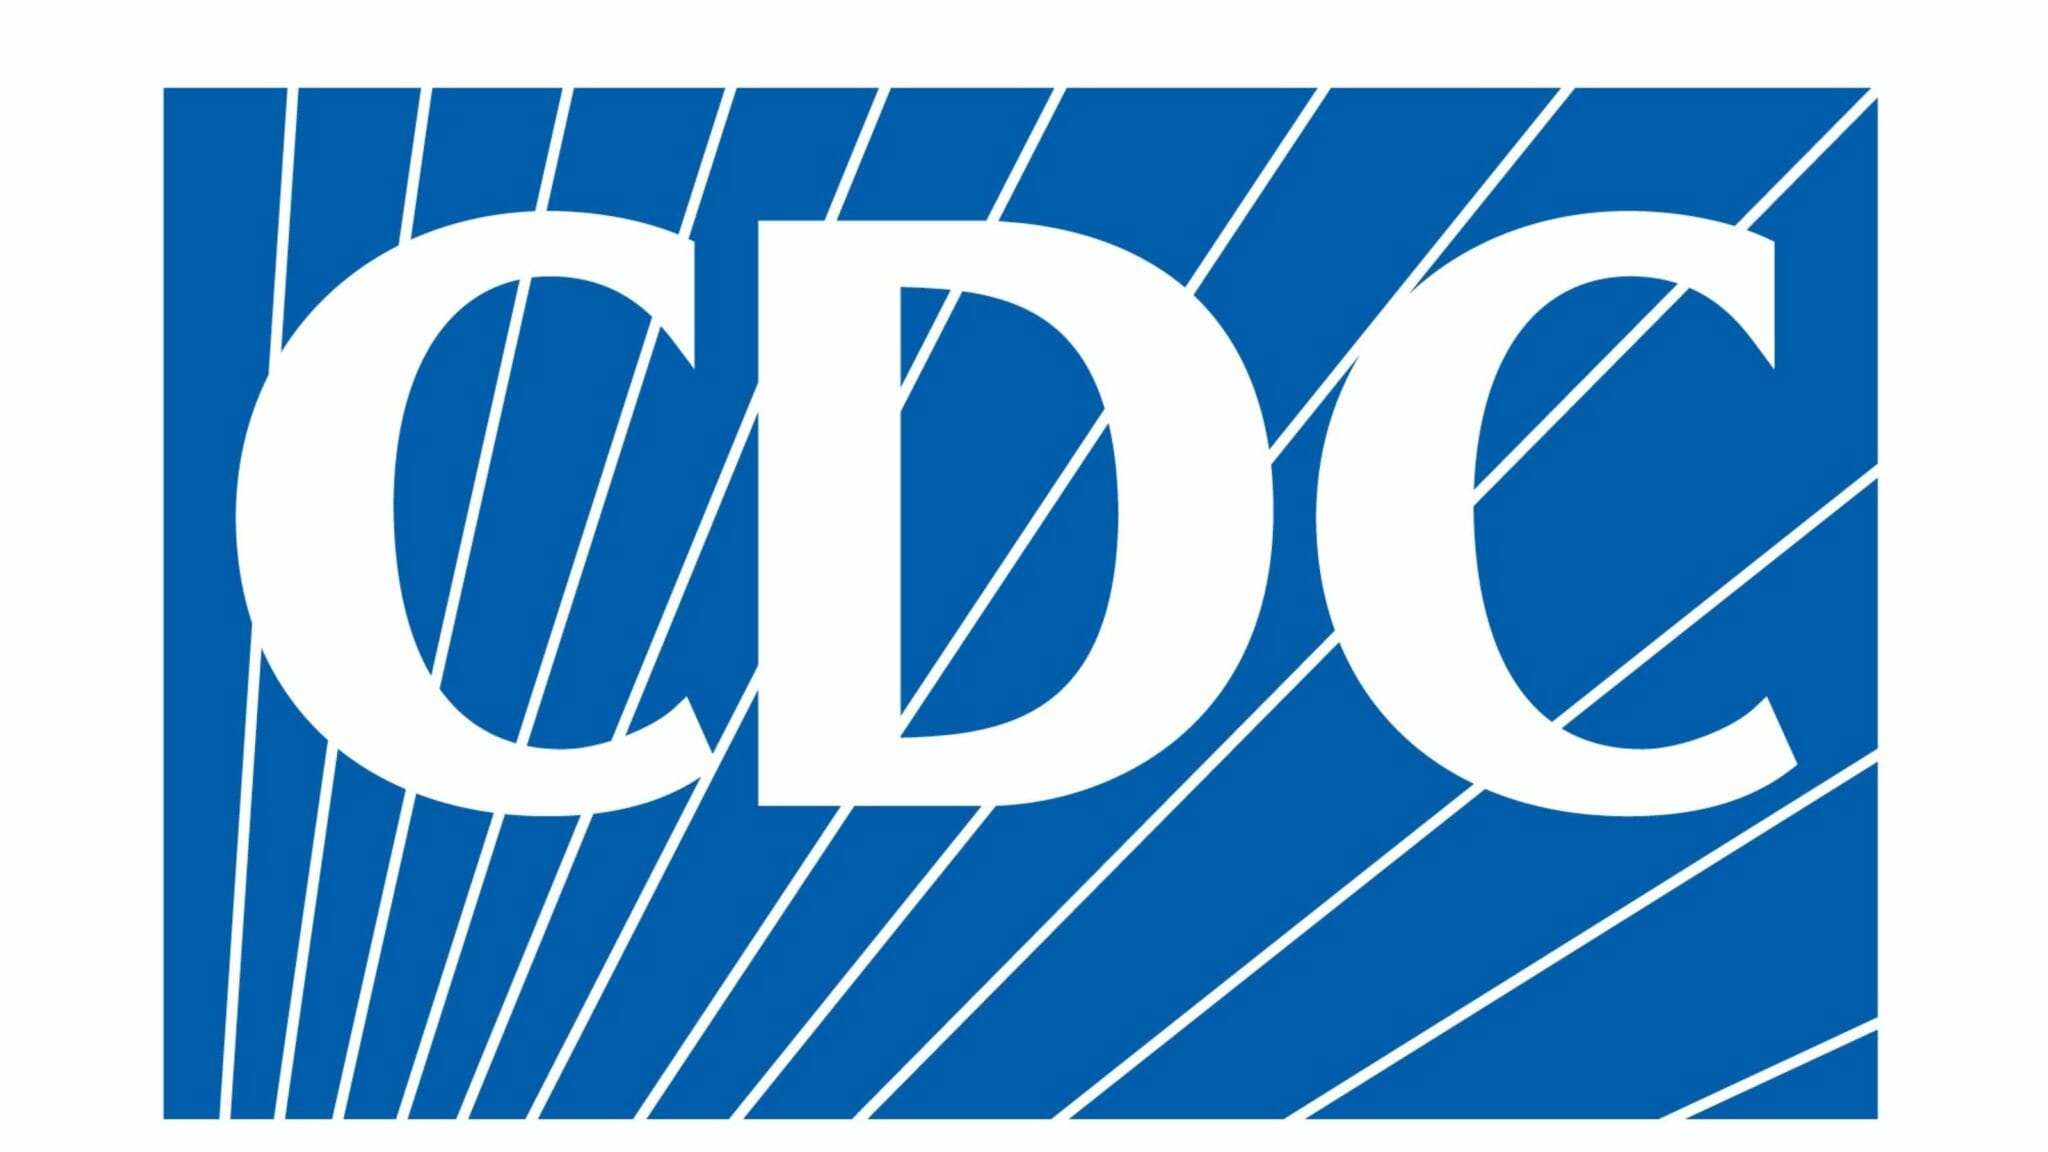 U.S. Centers for Disease Control logo, abbreviated to CDC